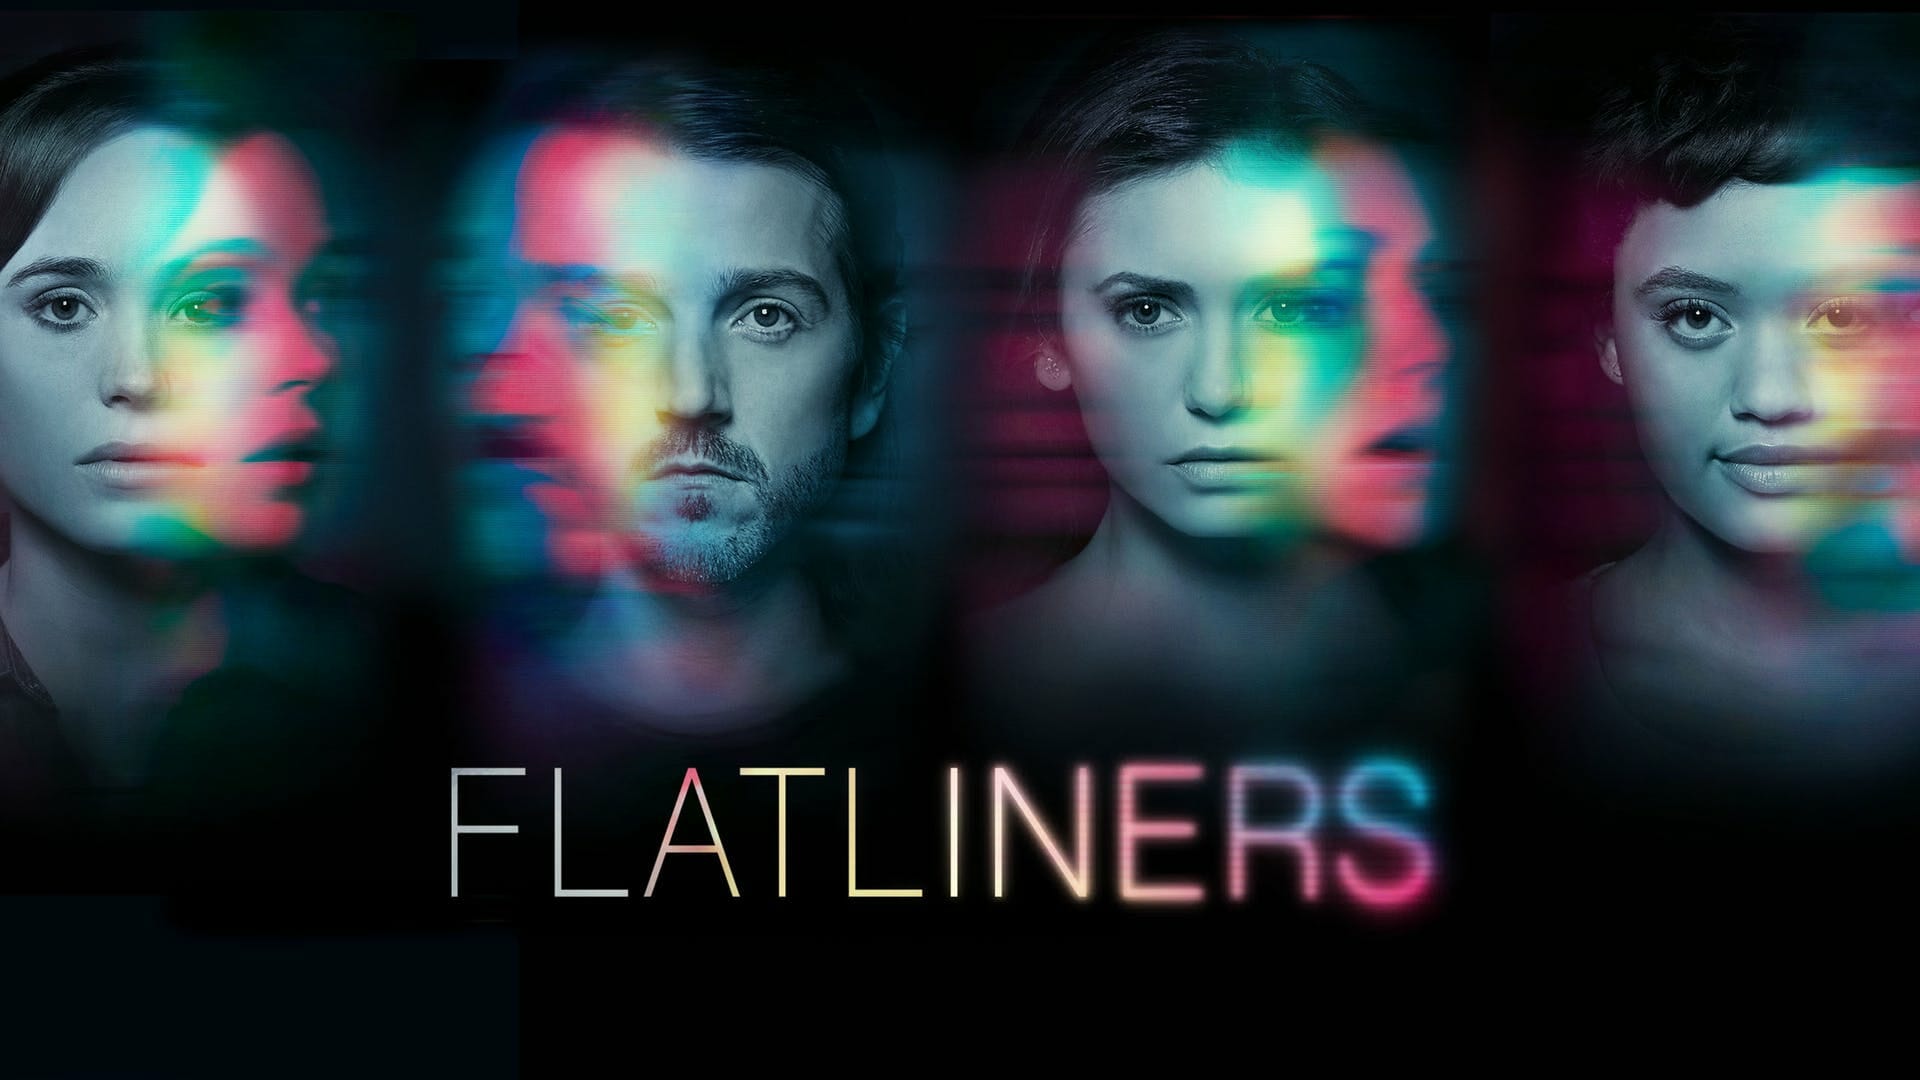 The cast of Flatliners